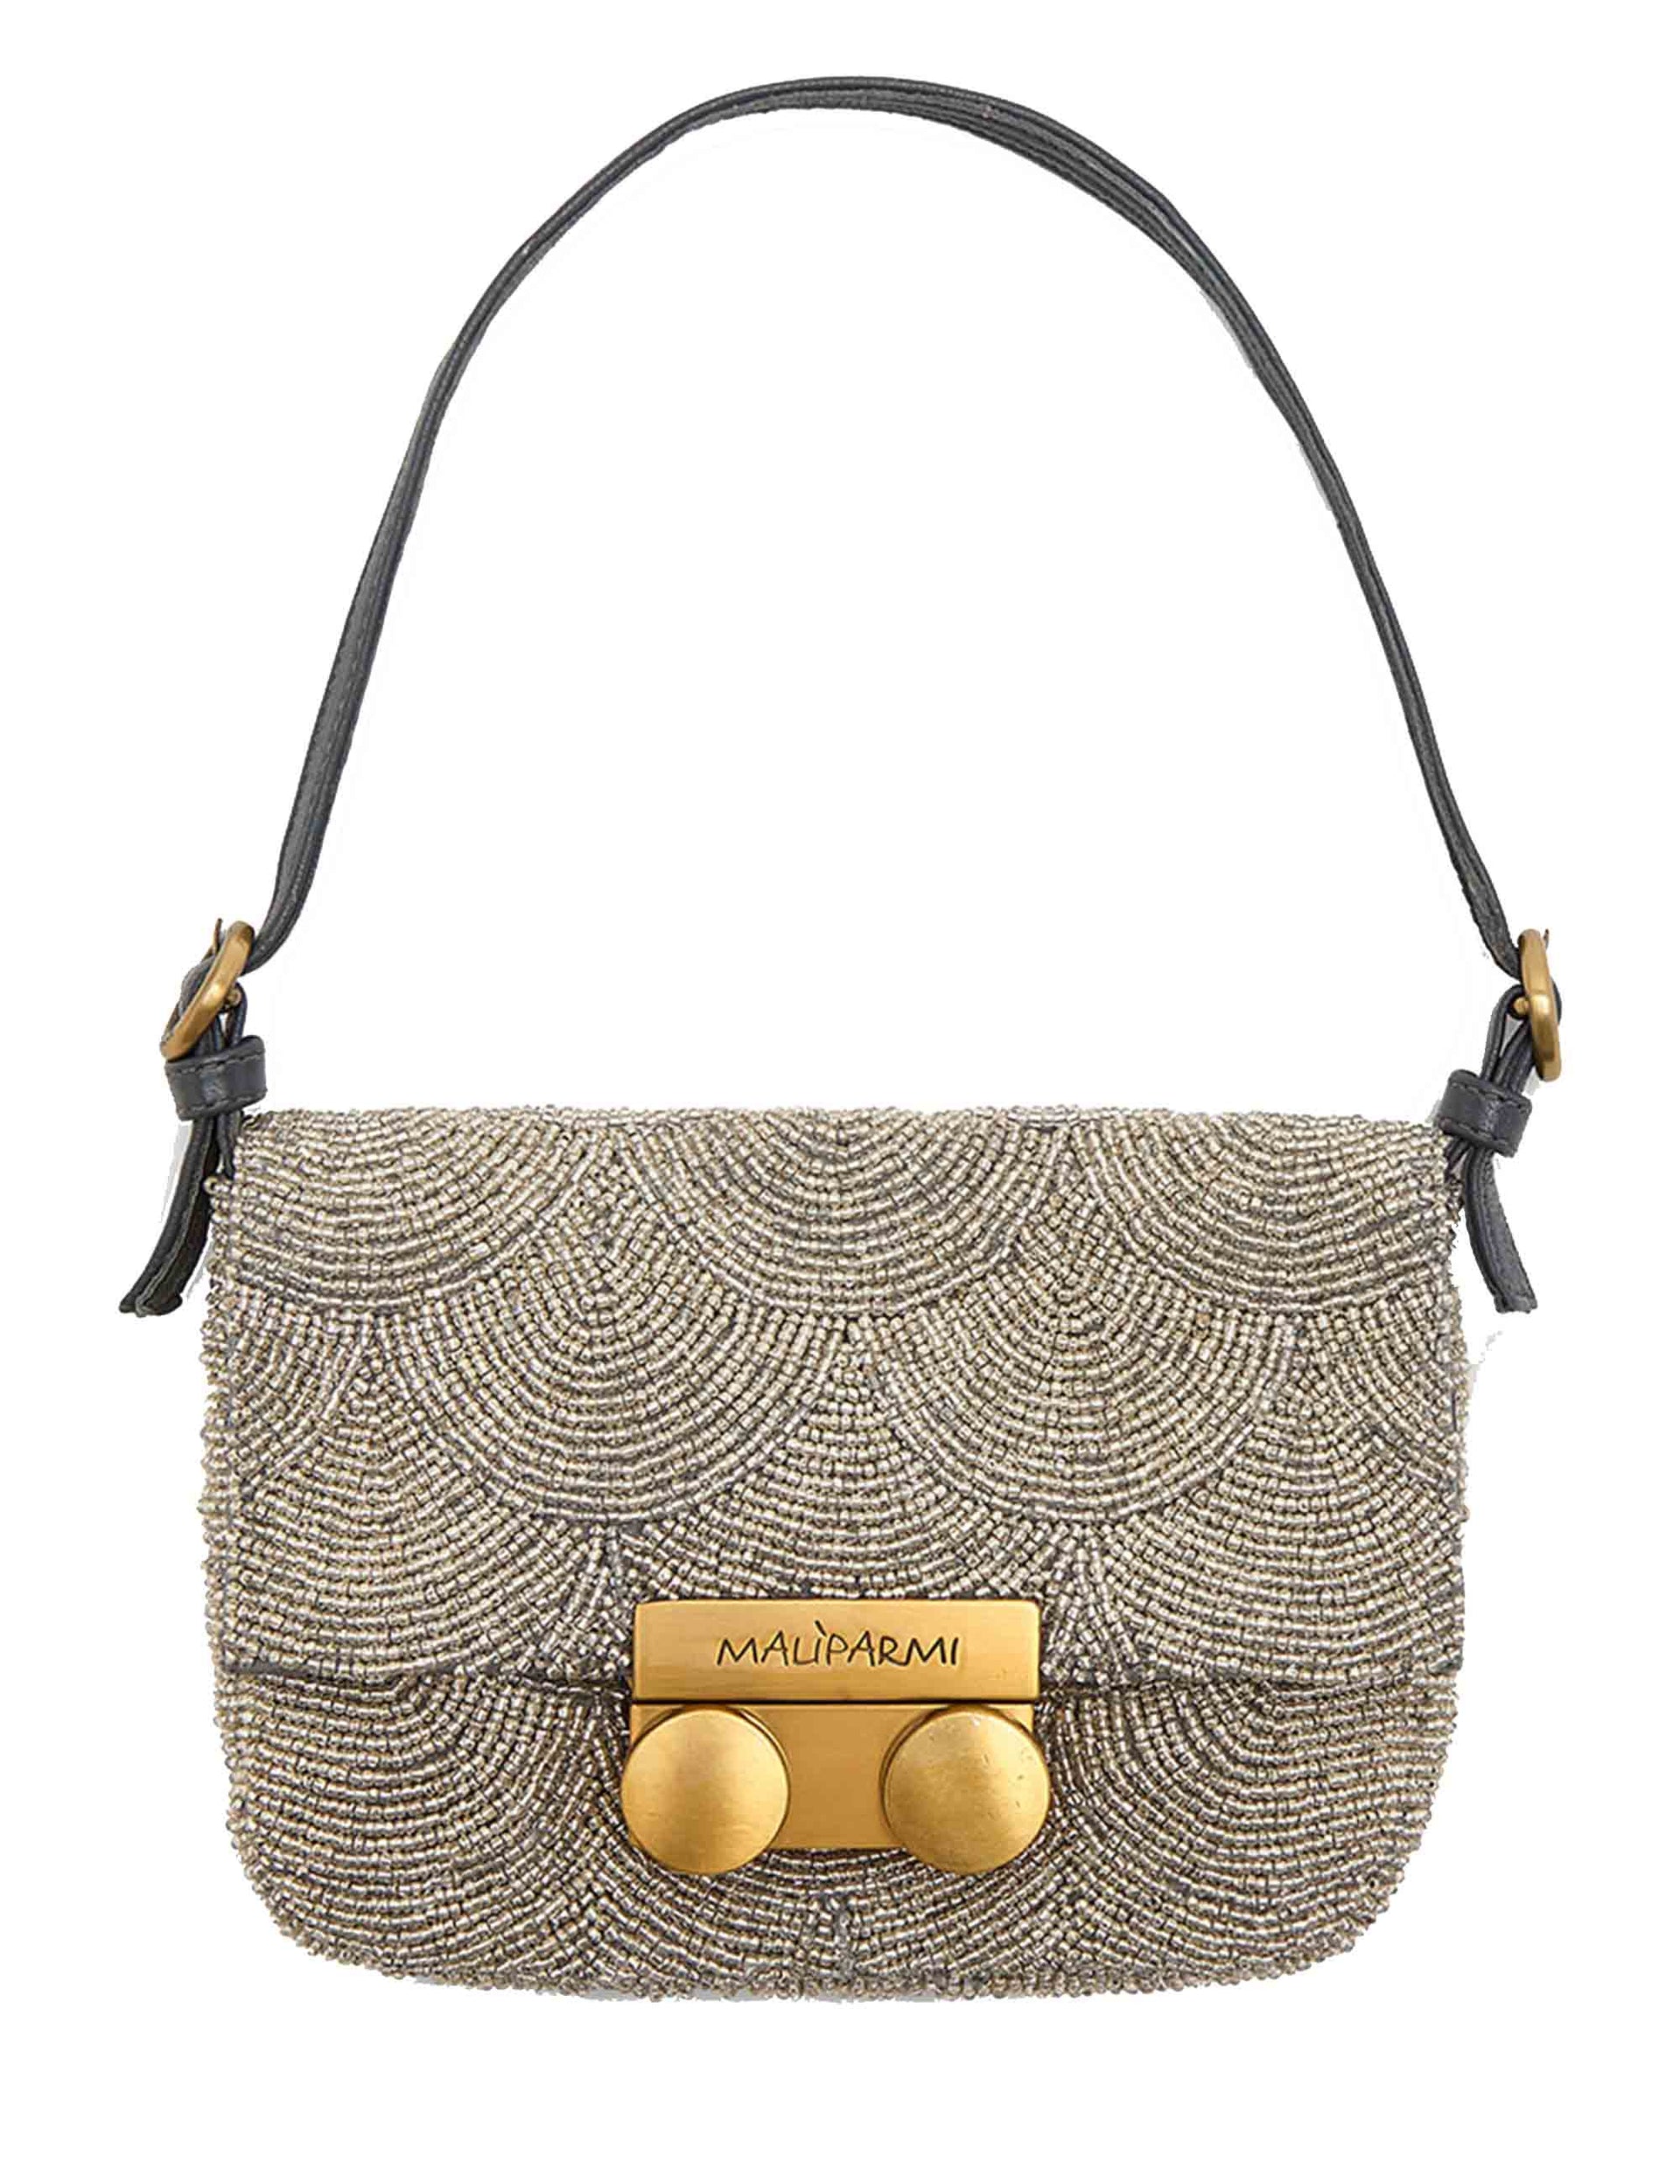 Circles Beades women's shoulder bags in silver beads and leather shoulder strap